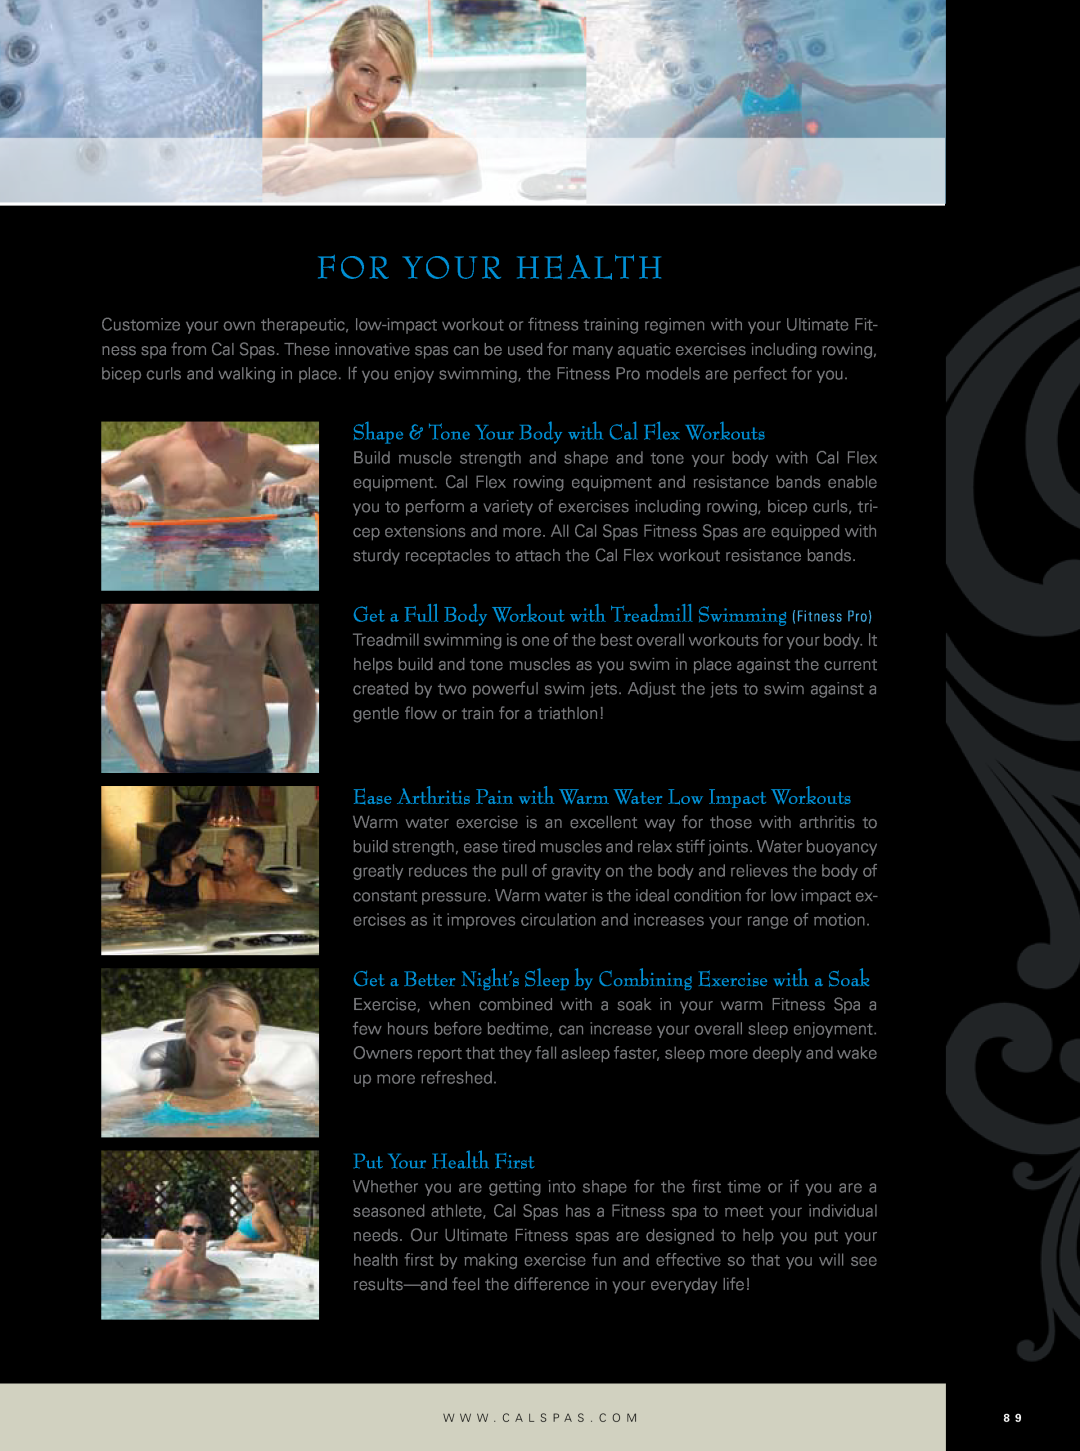 Cal Flame Hot Tub manual For Your Health, Shape & Tone Your Body with Cal Flex Workouts, Put Your Health First 